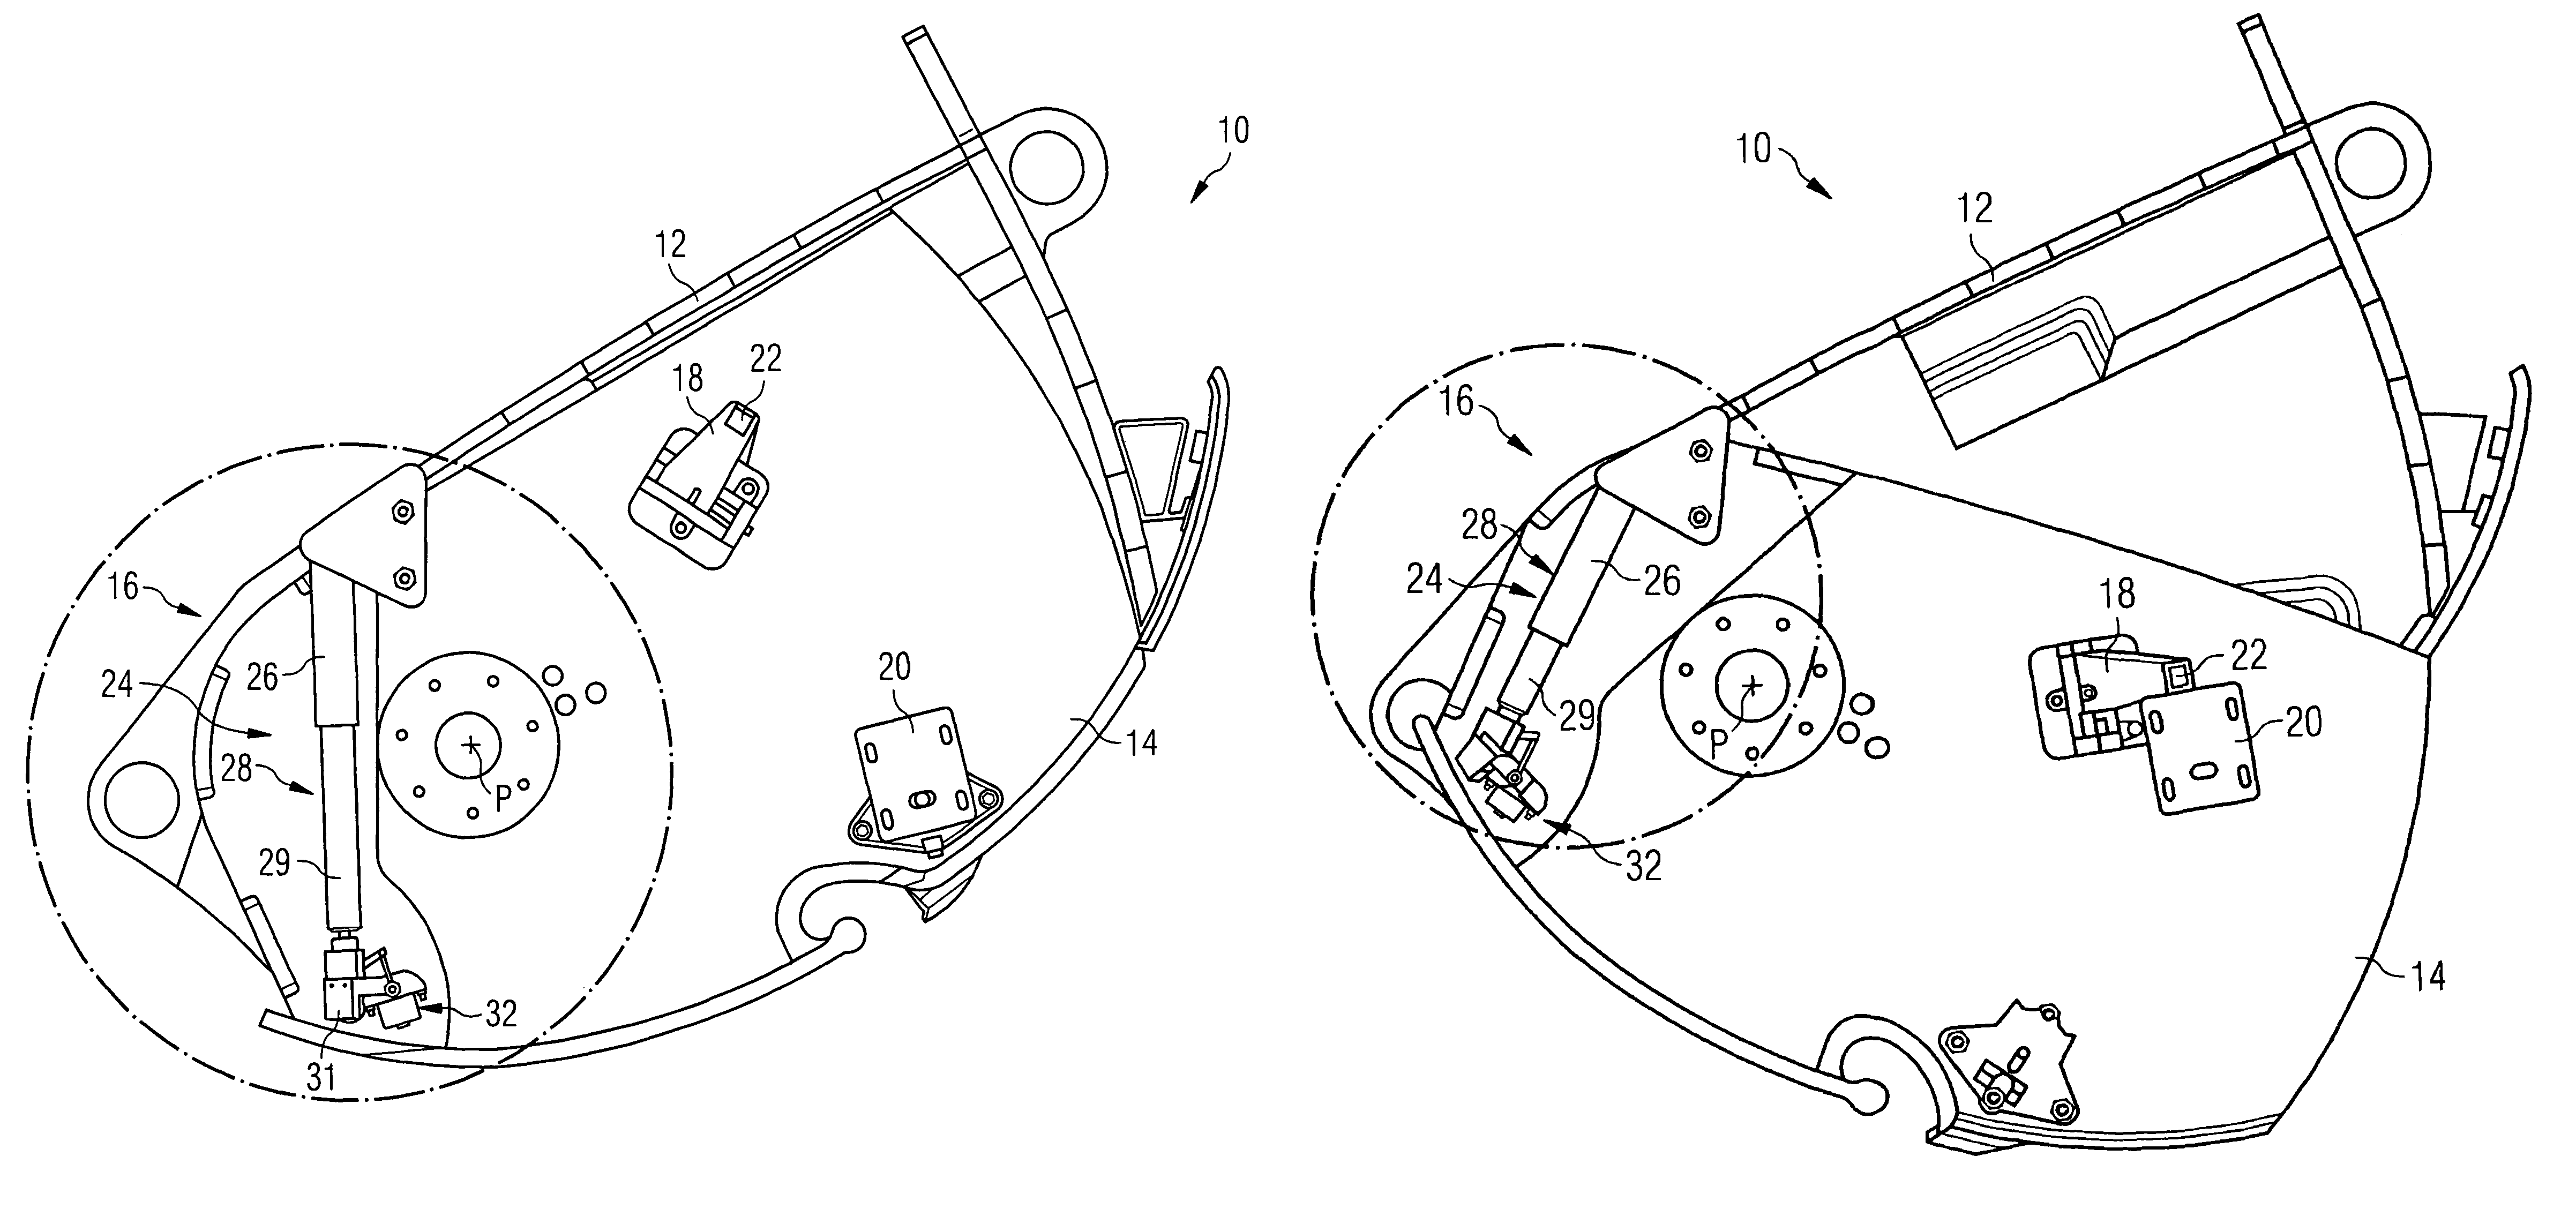 Force assisting system for luggage system